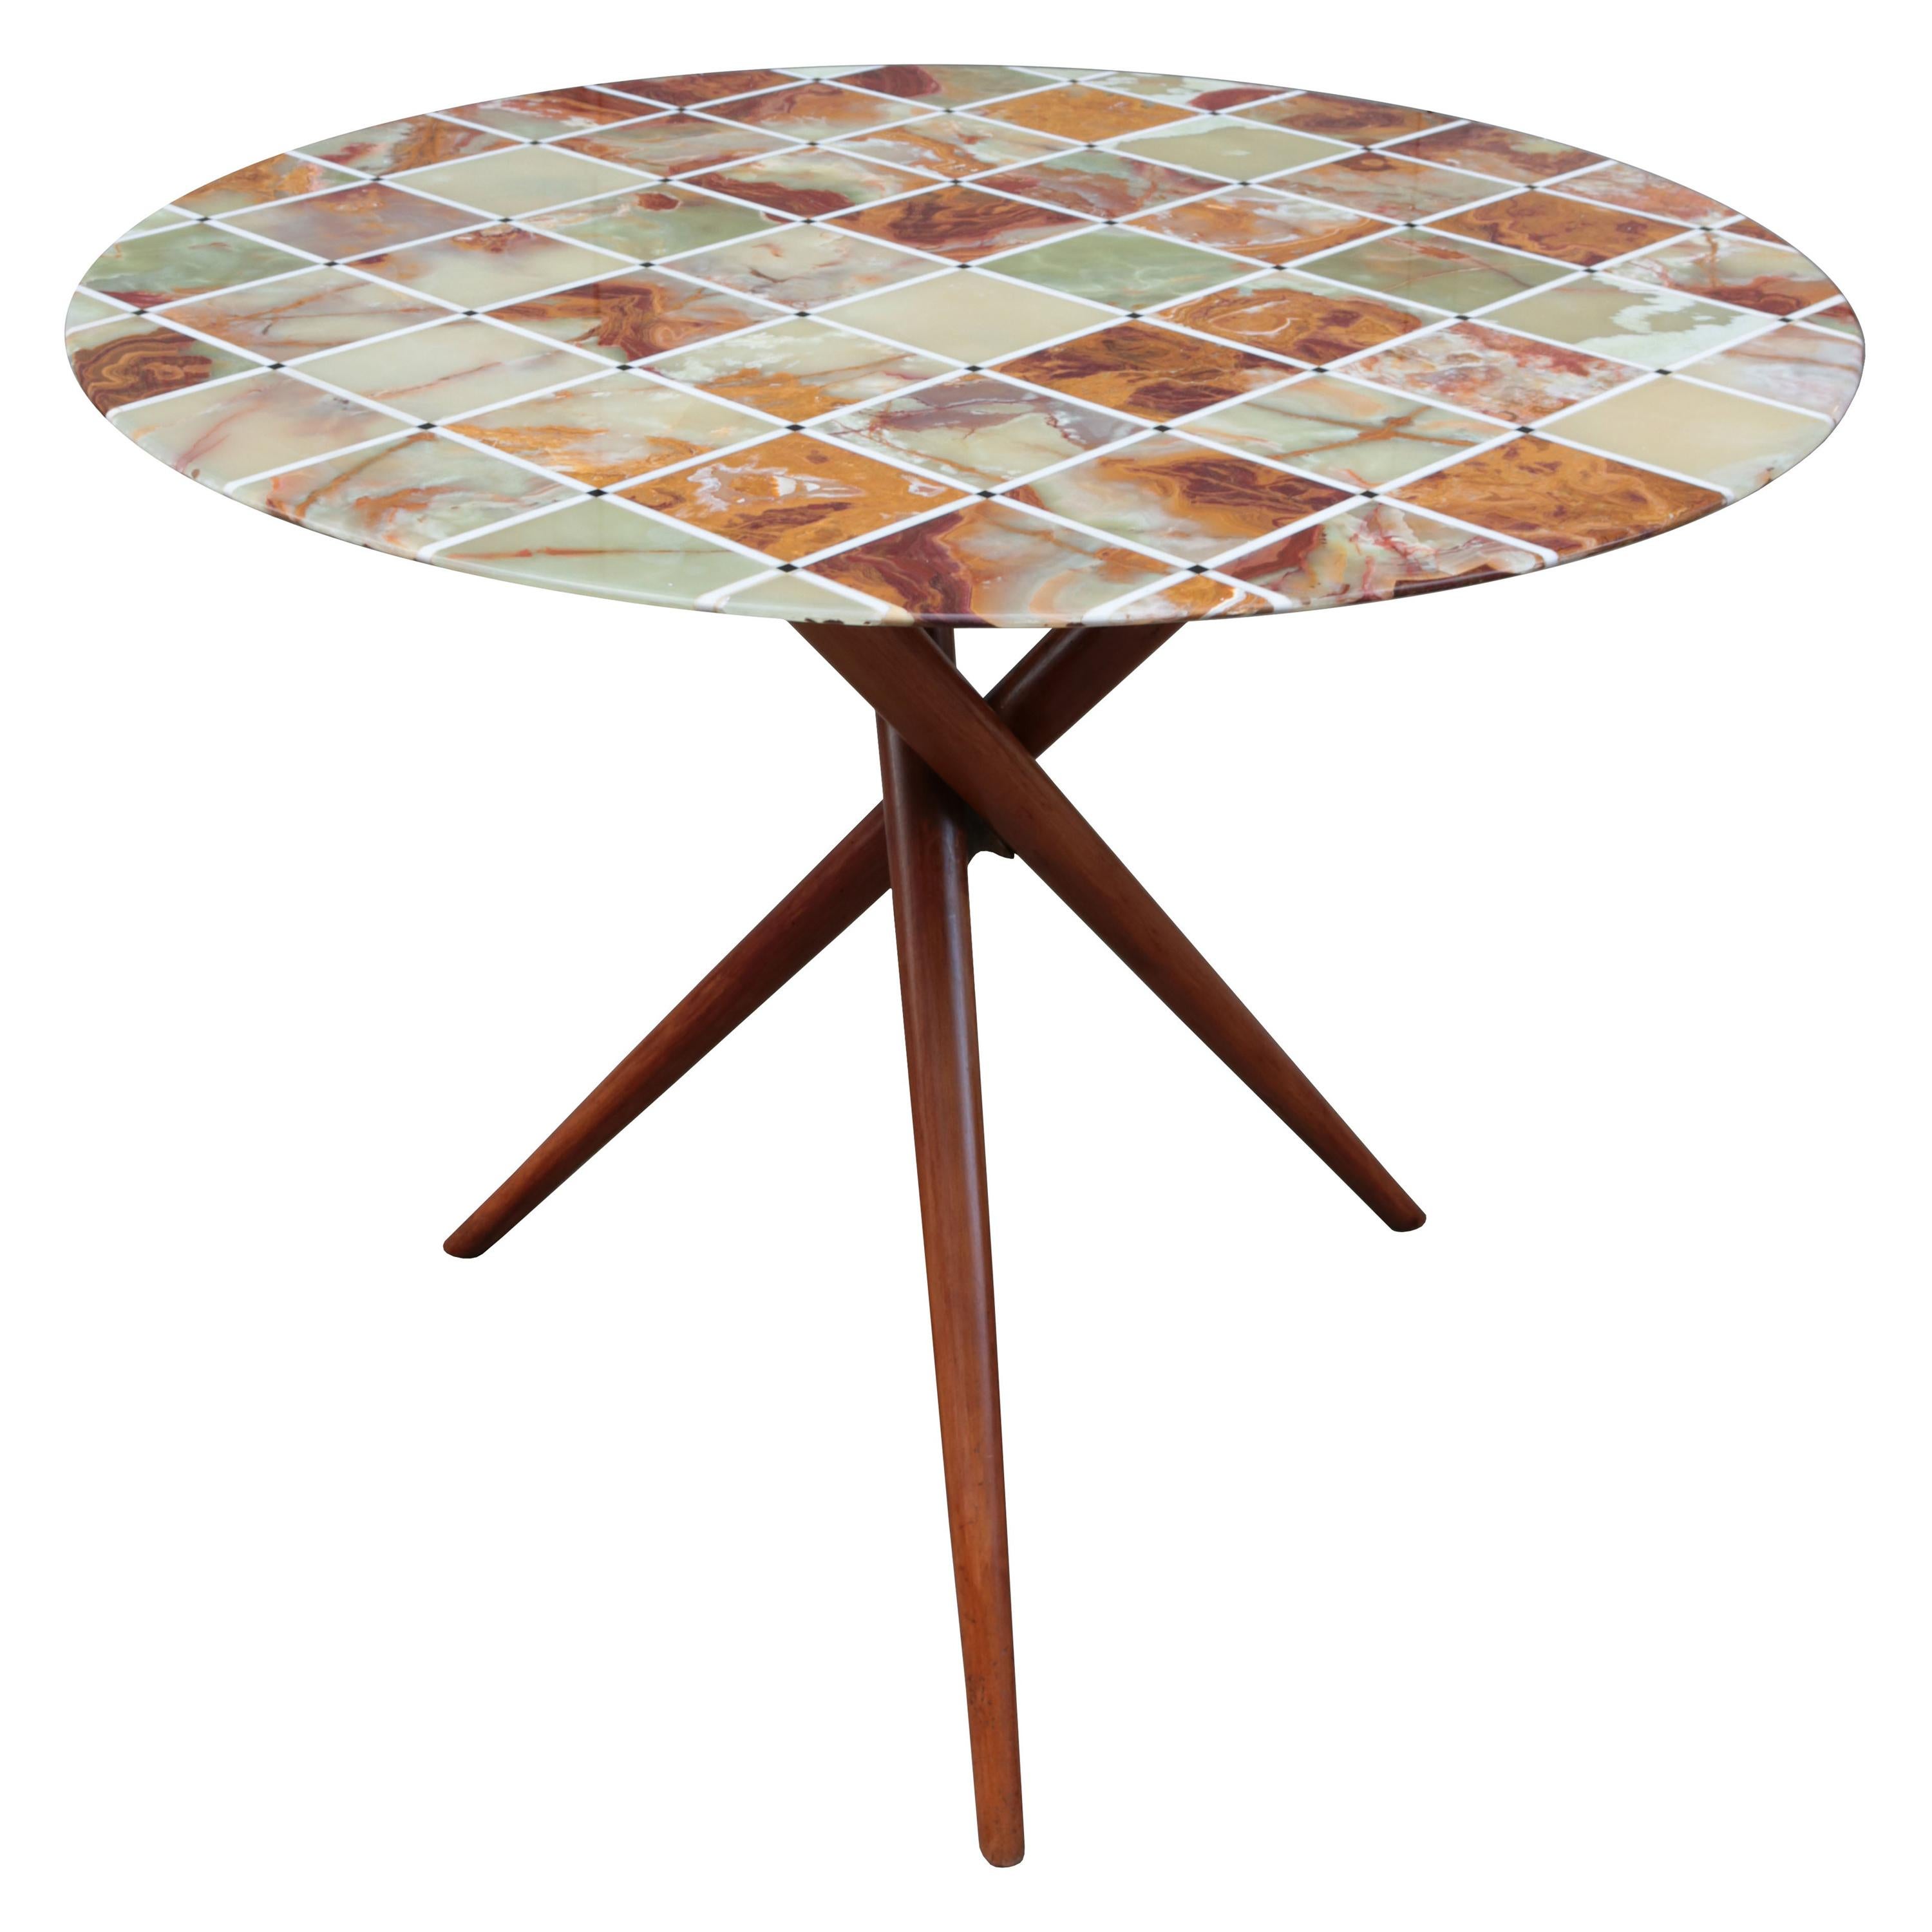 Midcentury Center Table with Fine Inlaid Stone Top